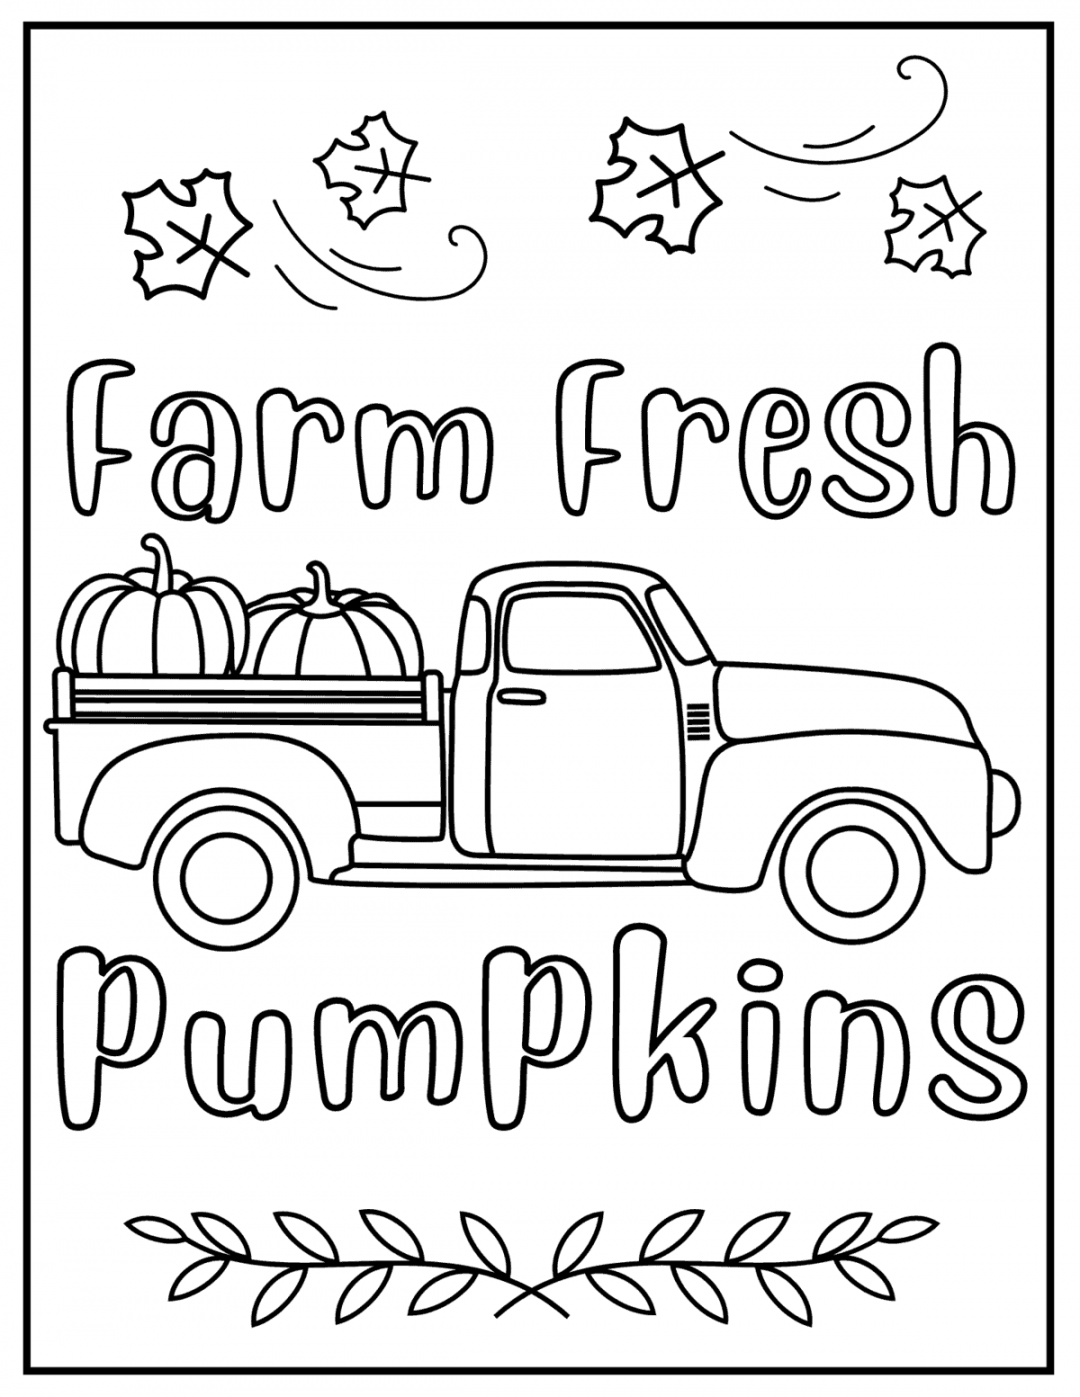 Free Printable Coloring Pages For Fall - Printable -  Free Printable Fall Coloring Pages - Prudent Penny Pincher